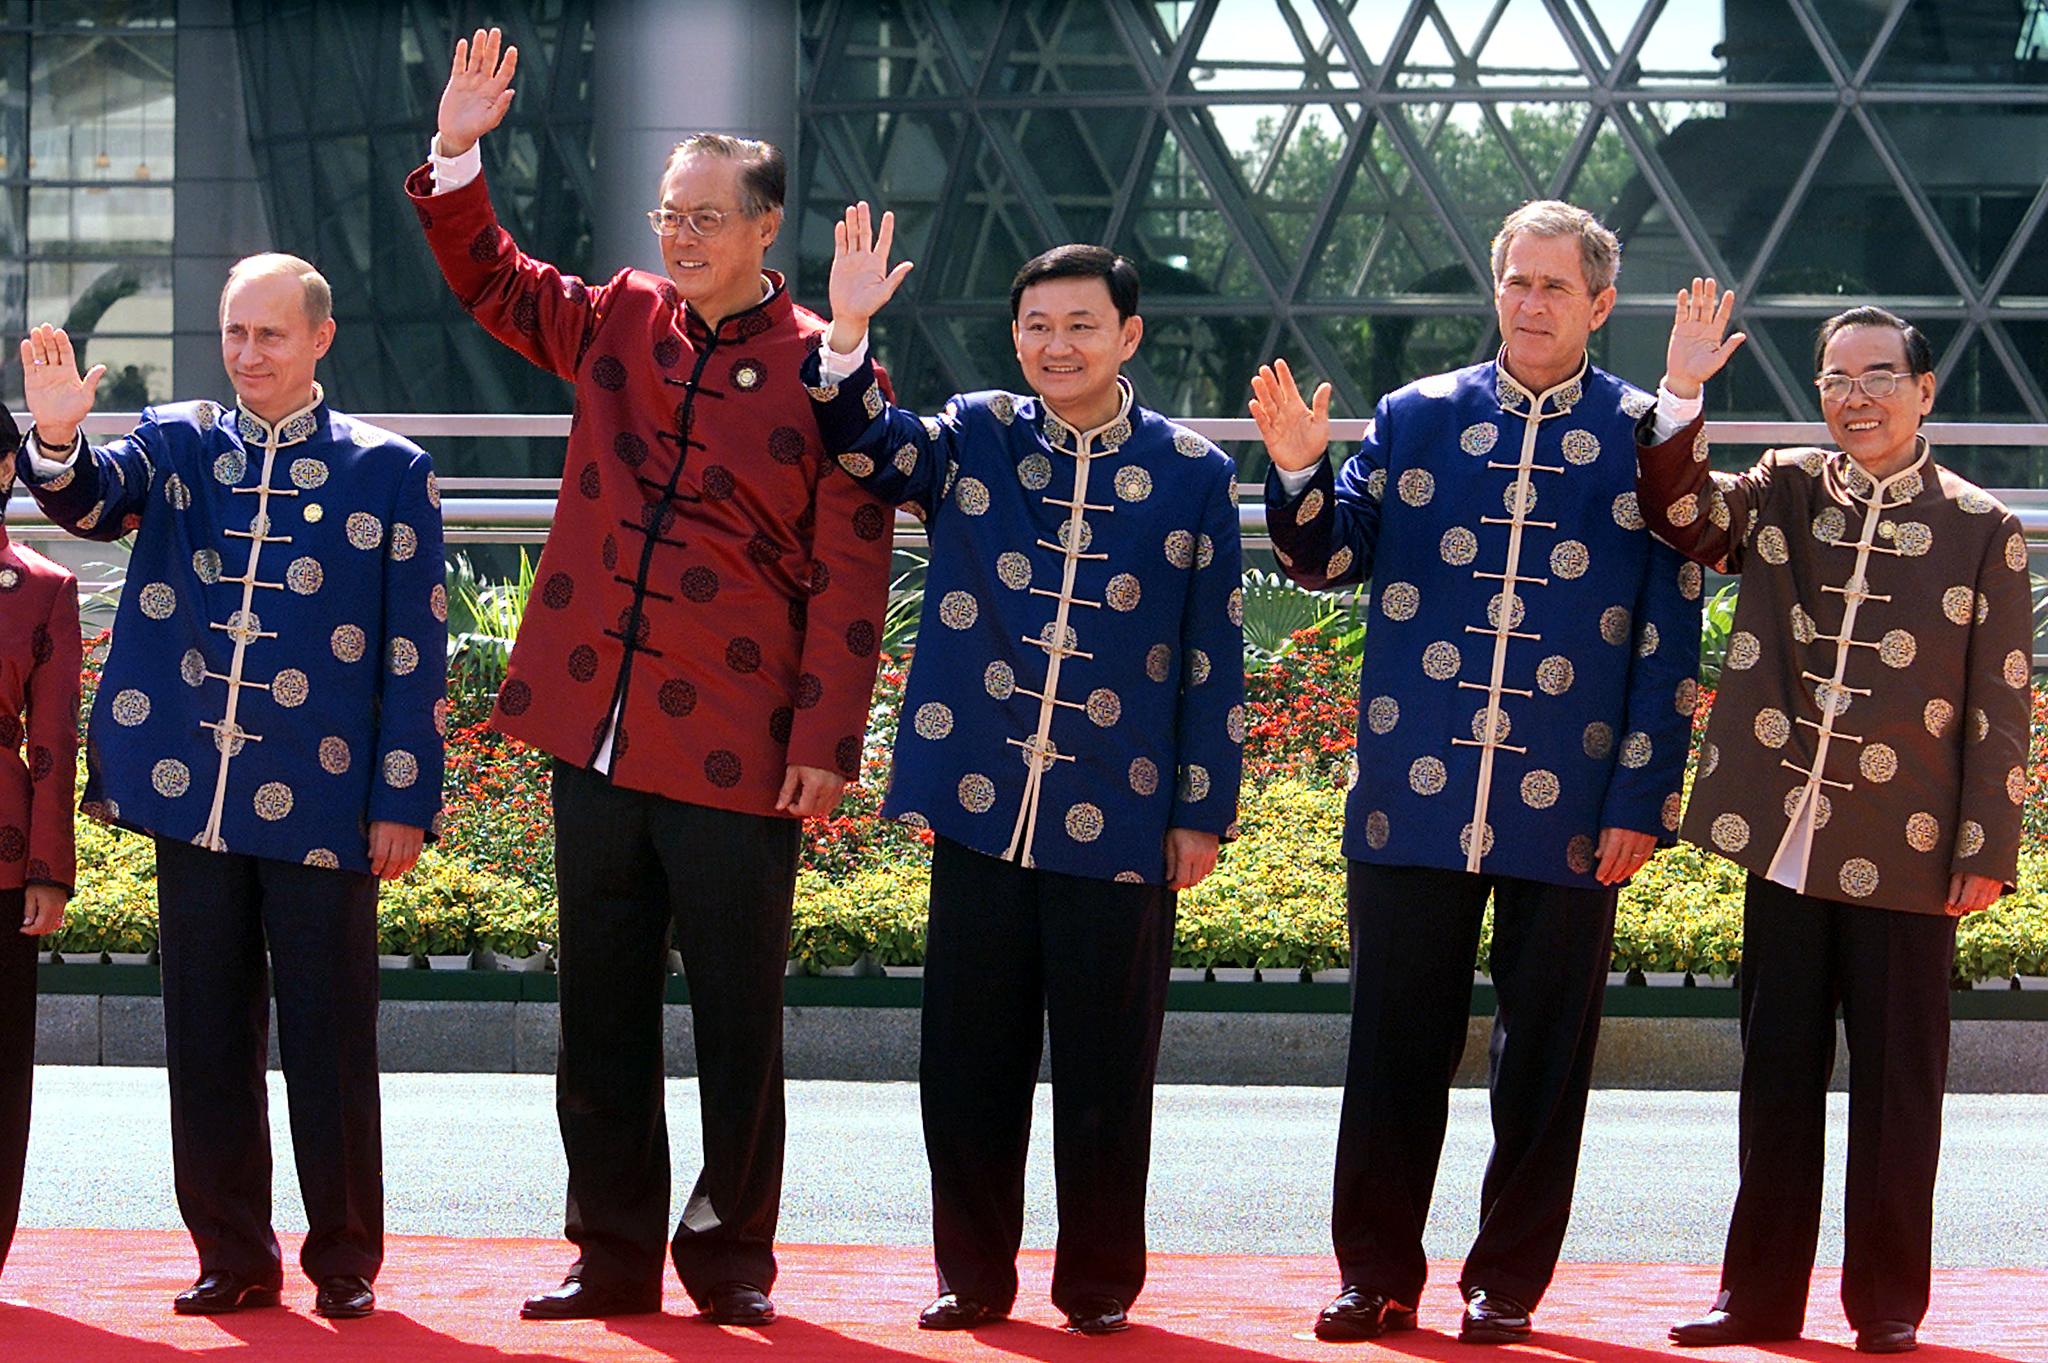 World leaders, dressed in traditional Chinese attire, pose for a photo taken by the press.